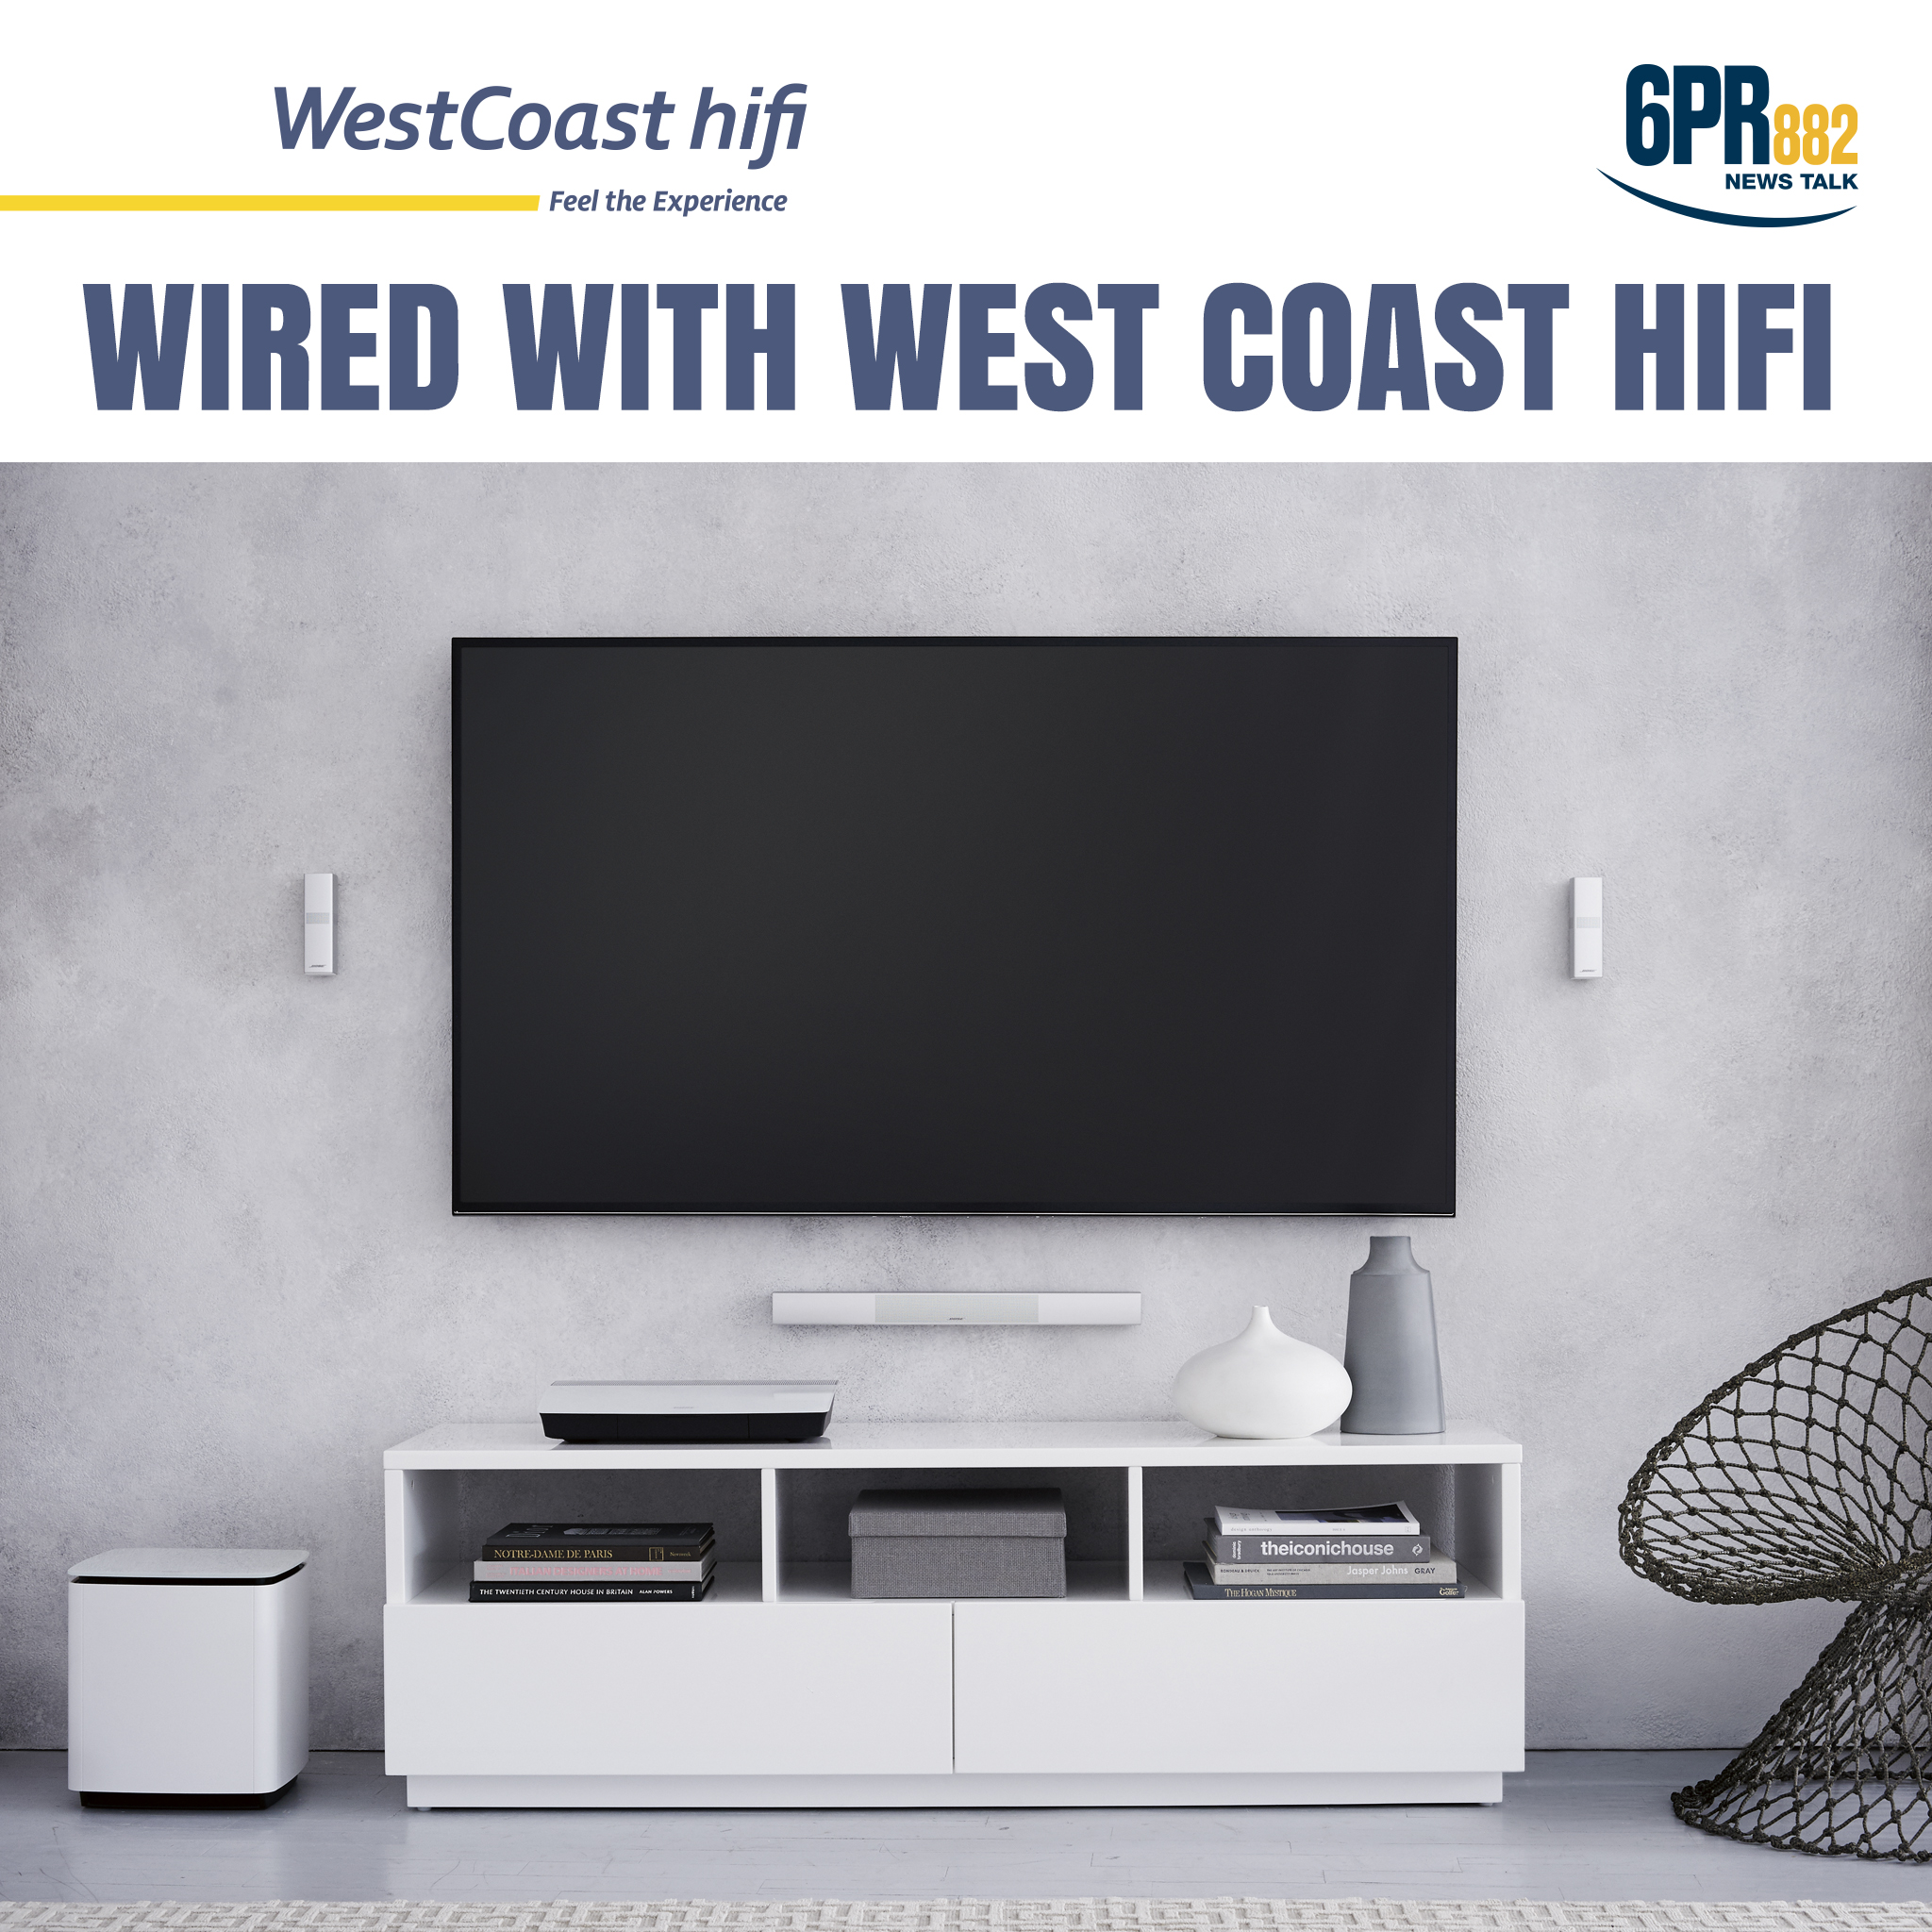 Wired with West Coast HiFi